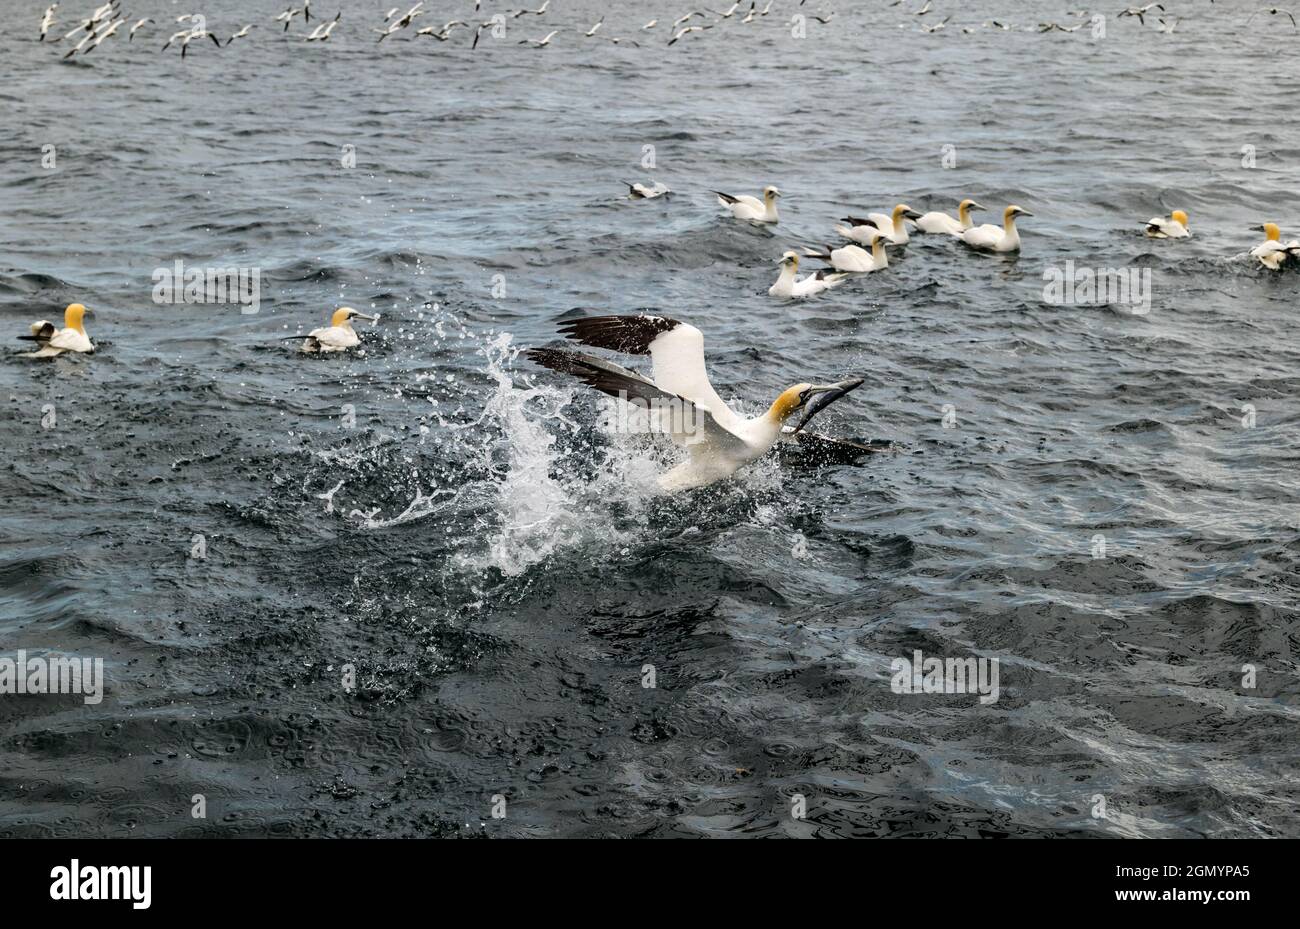 Northern gannets (Morus bassanus) fighting over herring fish in Firth of Forth, Scotland, UK Stock Photo